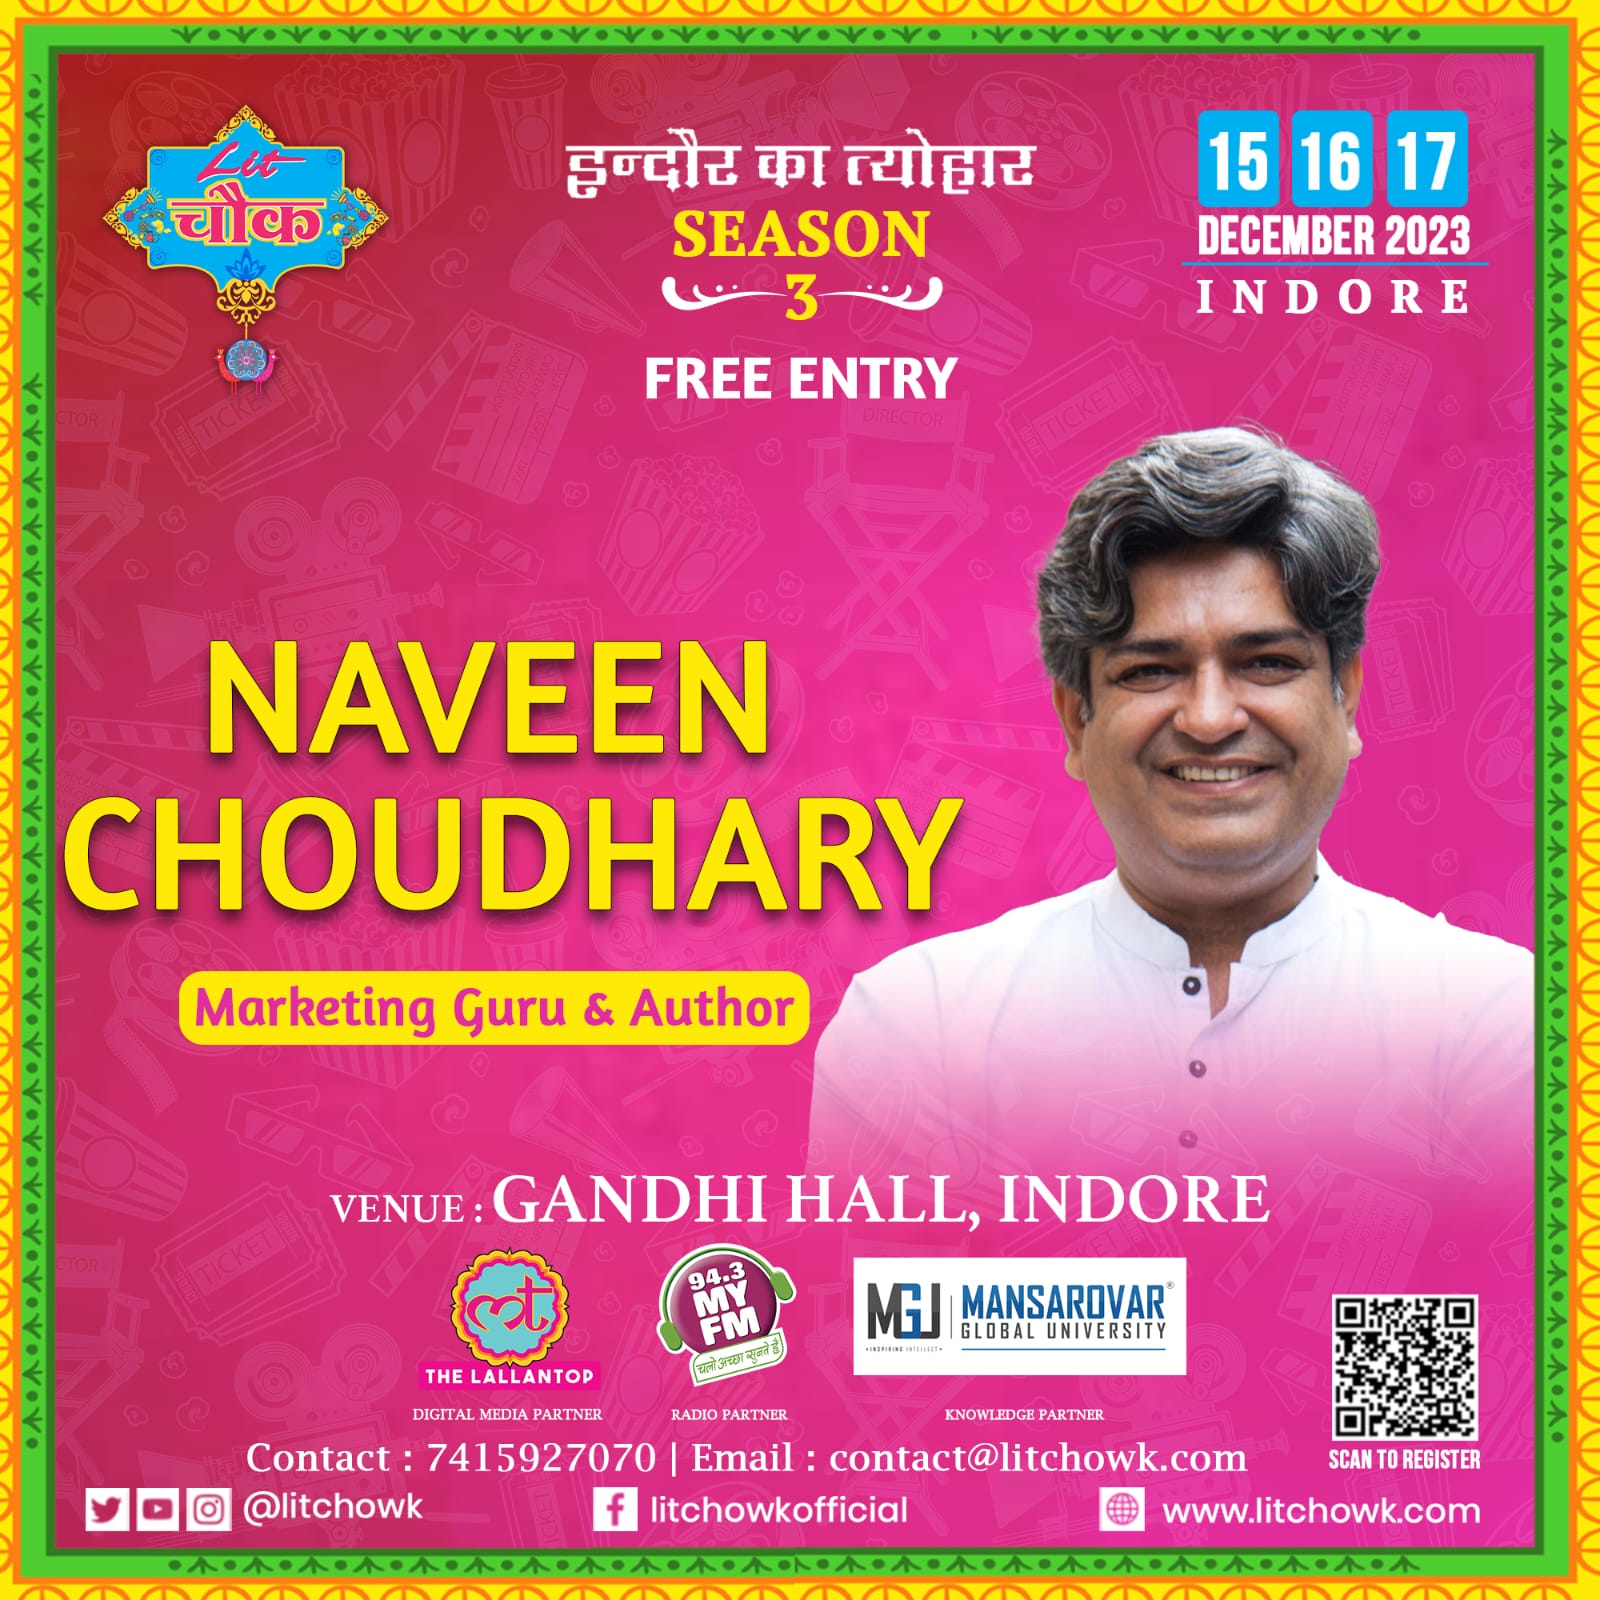 Naveen Choudhary Author at Lit Chowk Indore